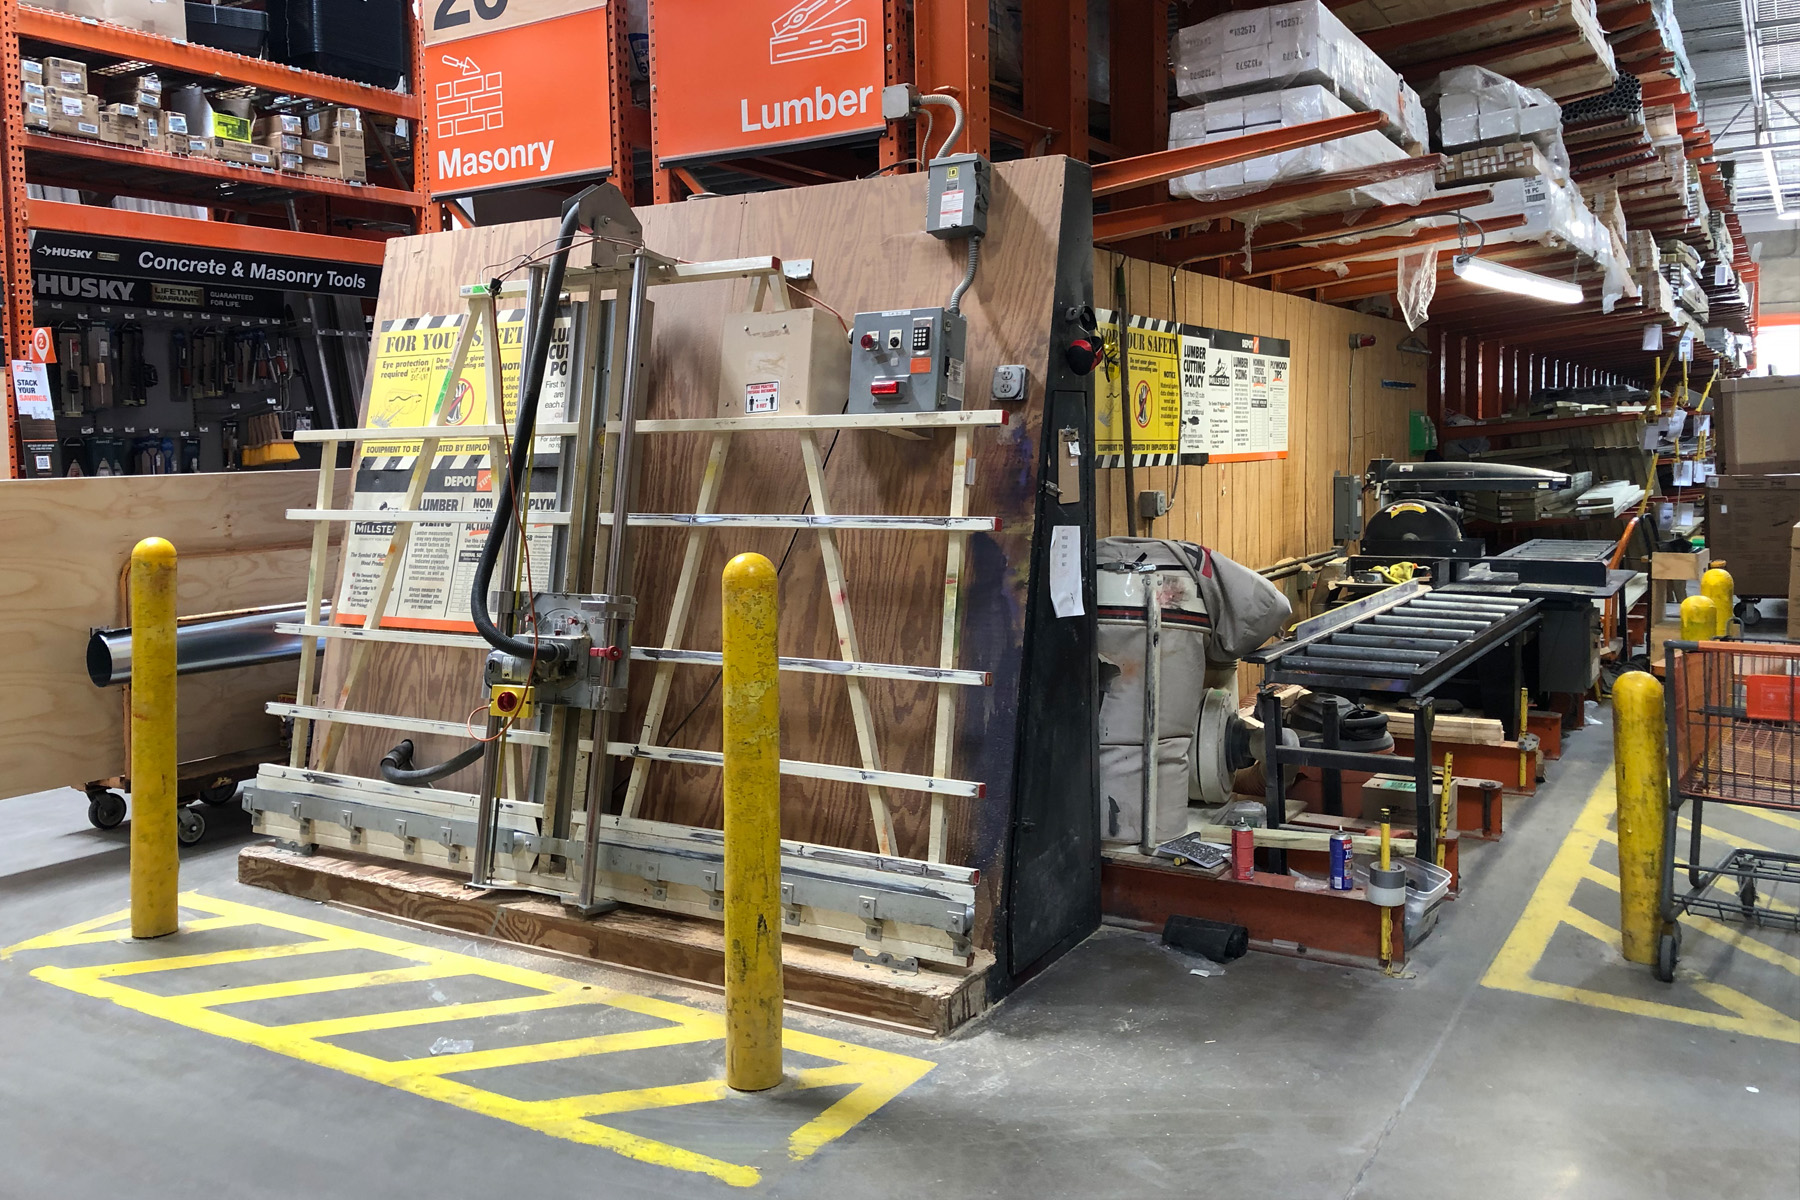 Home Depot cuts wood for free cutting station panel saw